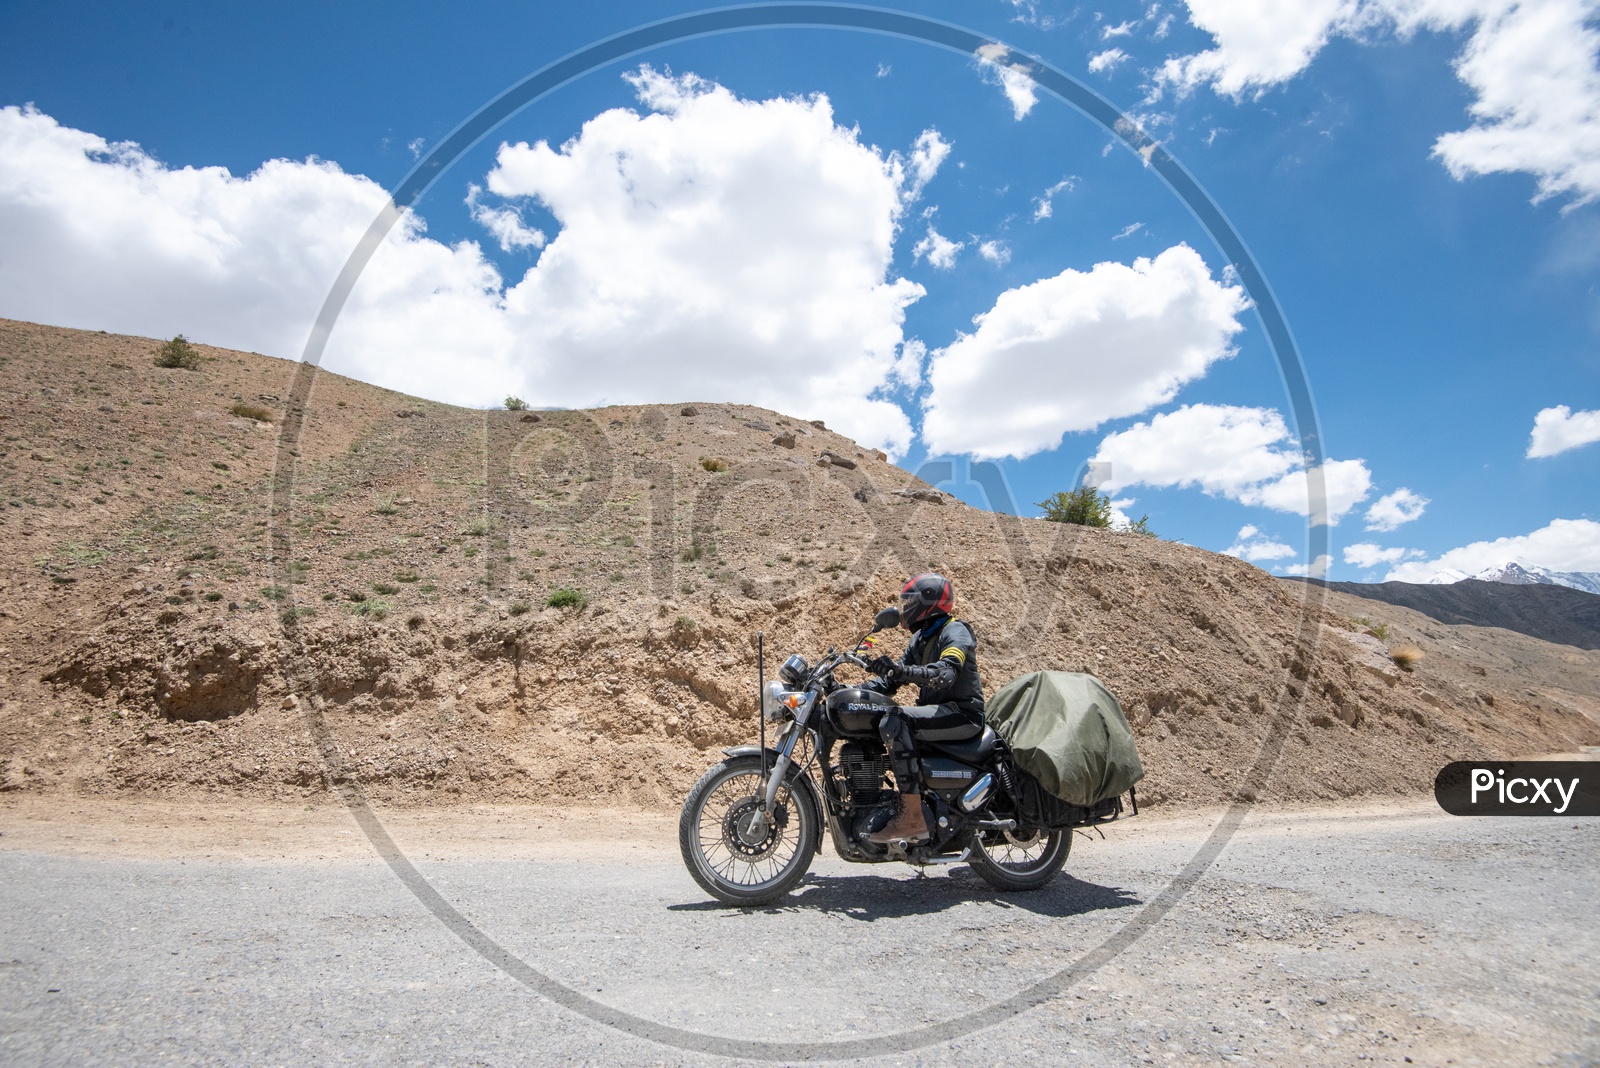 Bikers Riding Bikes On the Roads of Leh